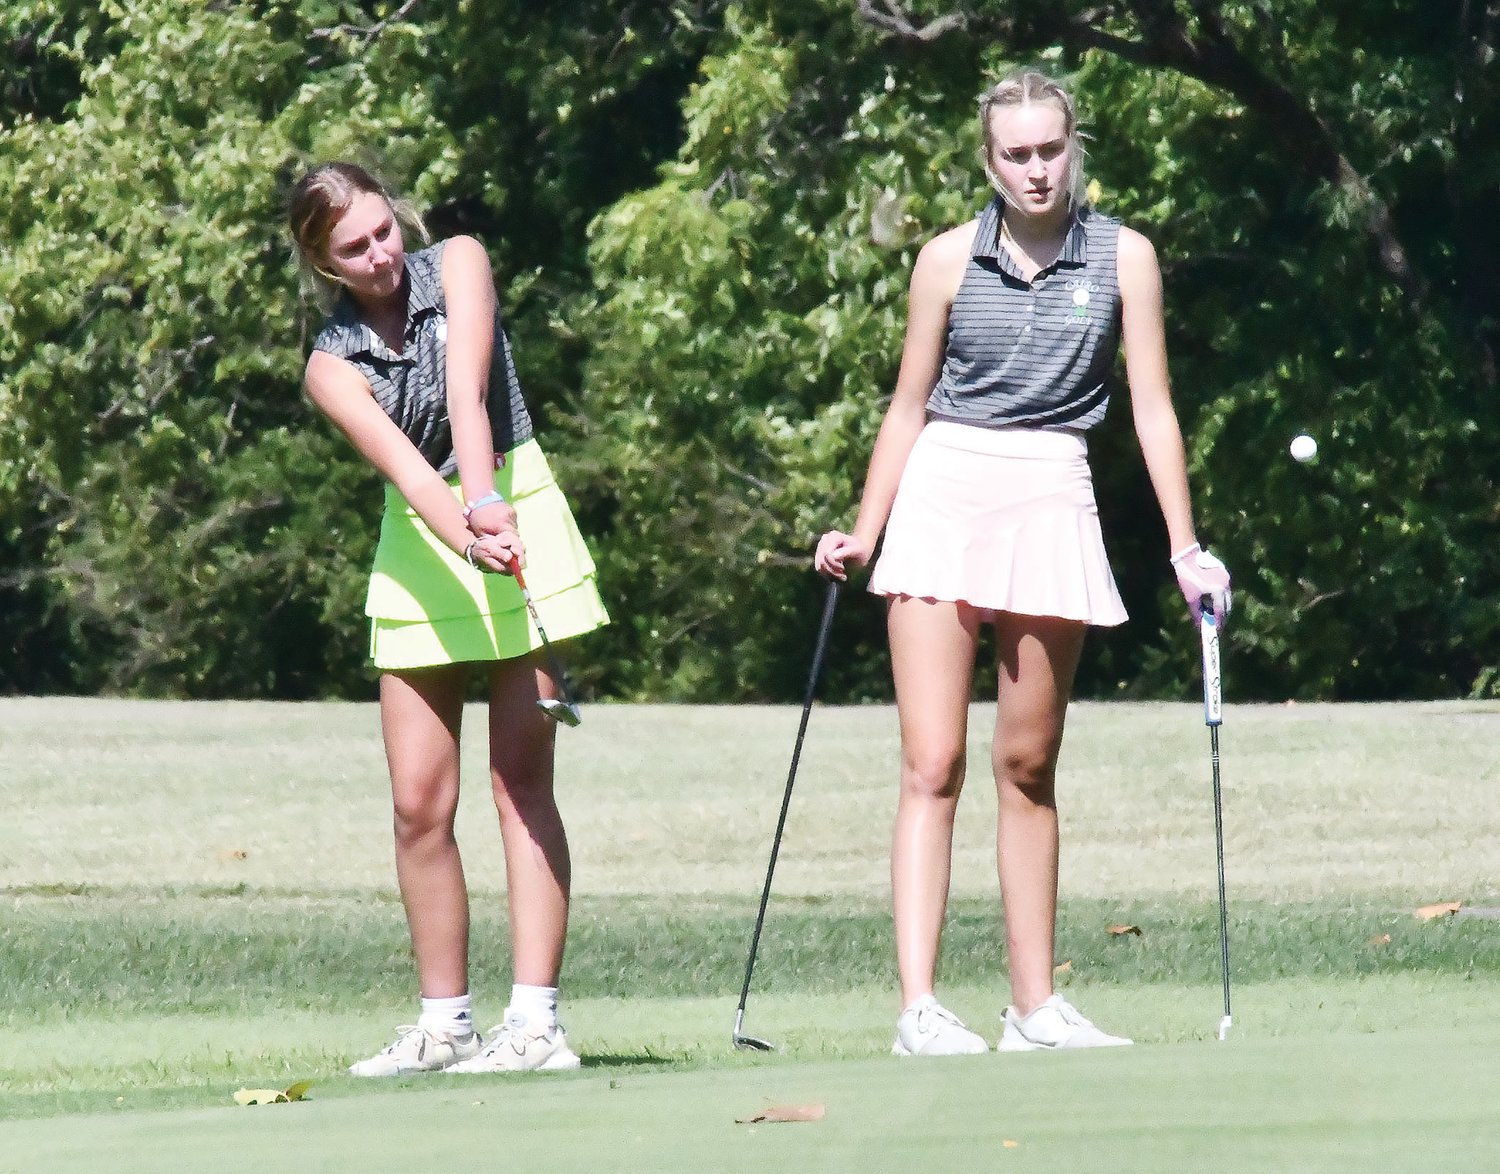 Cairo girls’ golfer Kennedy Kearns (left) chips the ball onto the green while teammate Macie Harman watches during Tuesday’s Harrisburg Scramble at L.A. Nickell Golf Course in Columbia. Scramble tournaments are becoming increasingly popular on both high school boys’ and girls’ golf schedules.